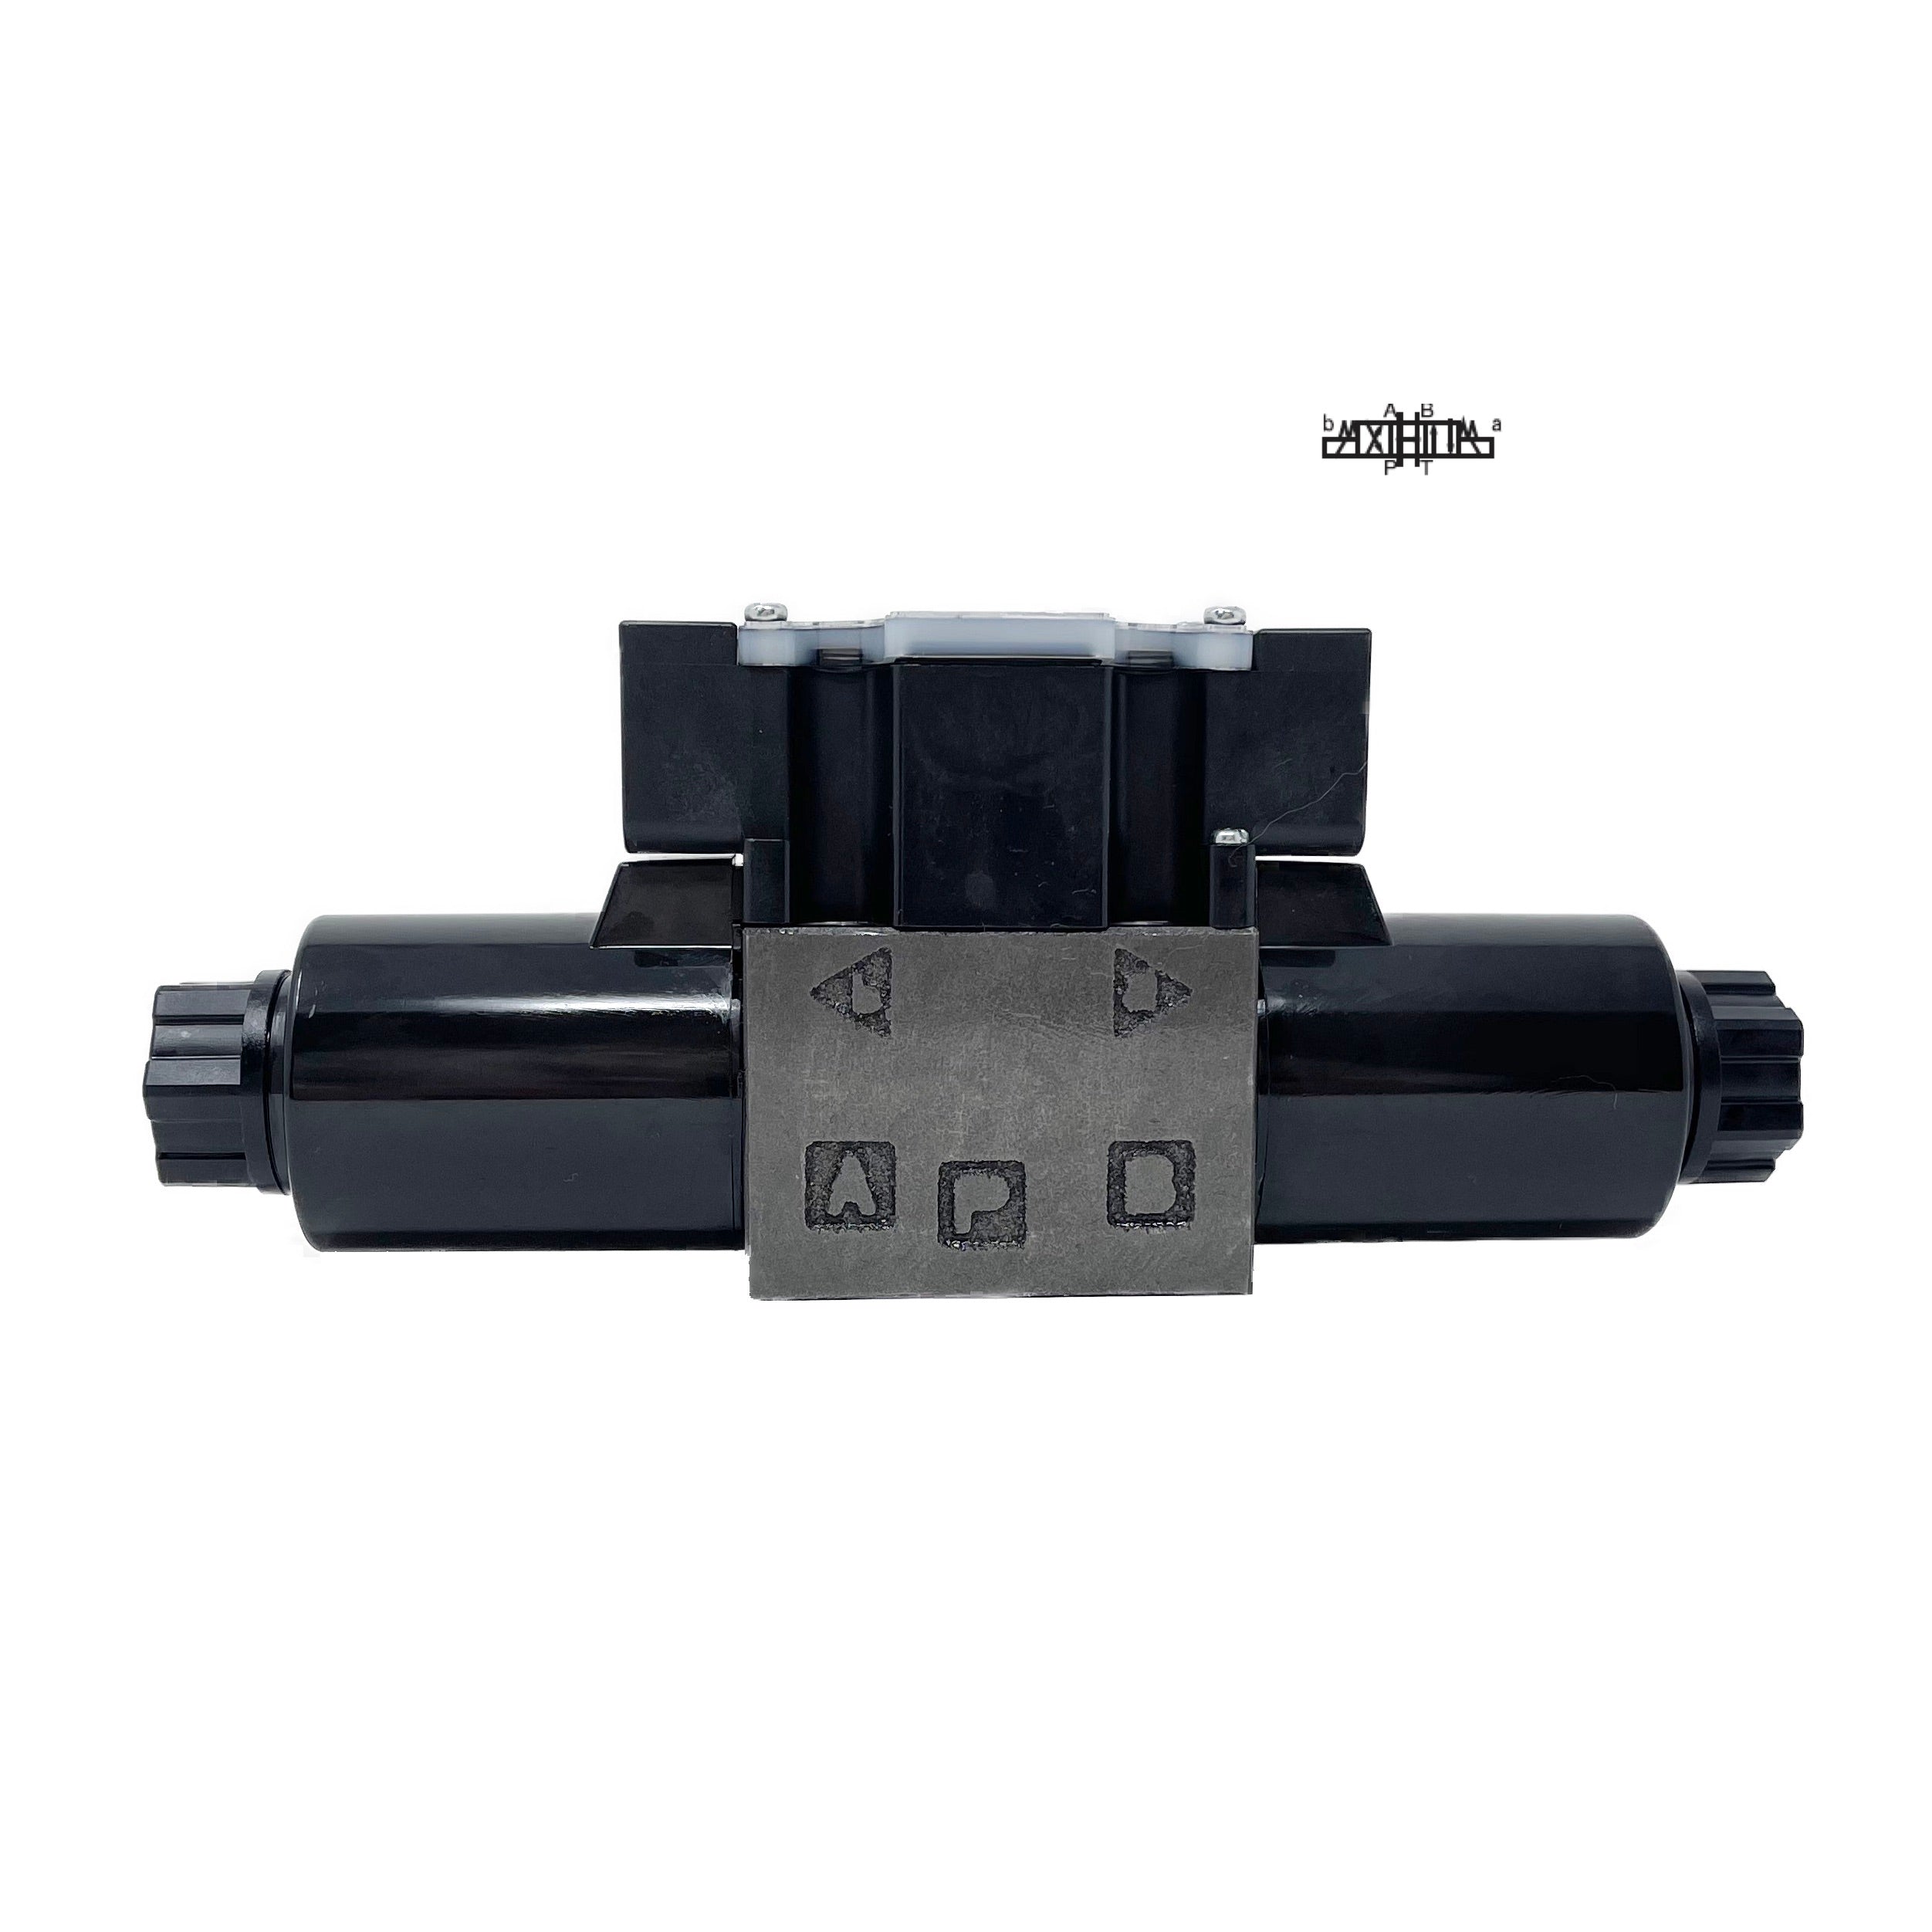 SS-G01-C4-FR-D2-E31 : Nachi Solenoid Valve, 3P4W, D03 (NG6), 13.2GPM, 5075psi, All Ports Open Neutral, 24 VDC, Wiring Box with Lights